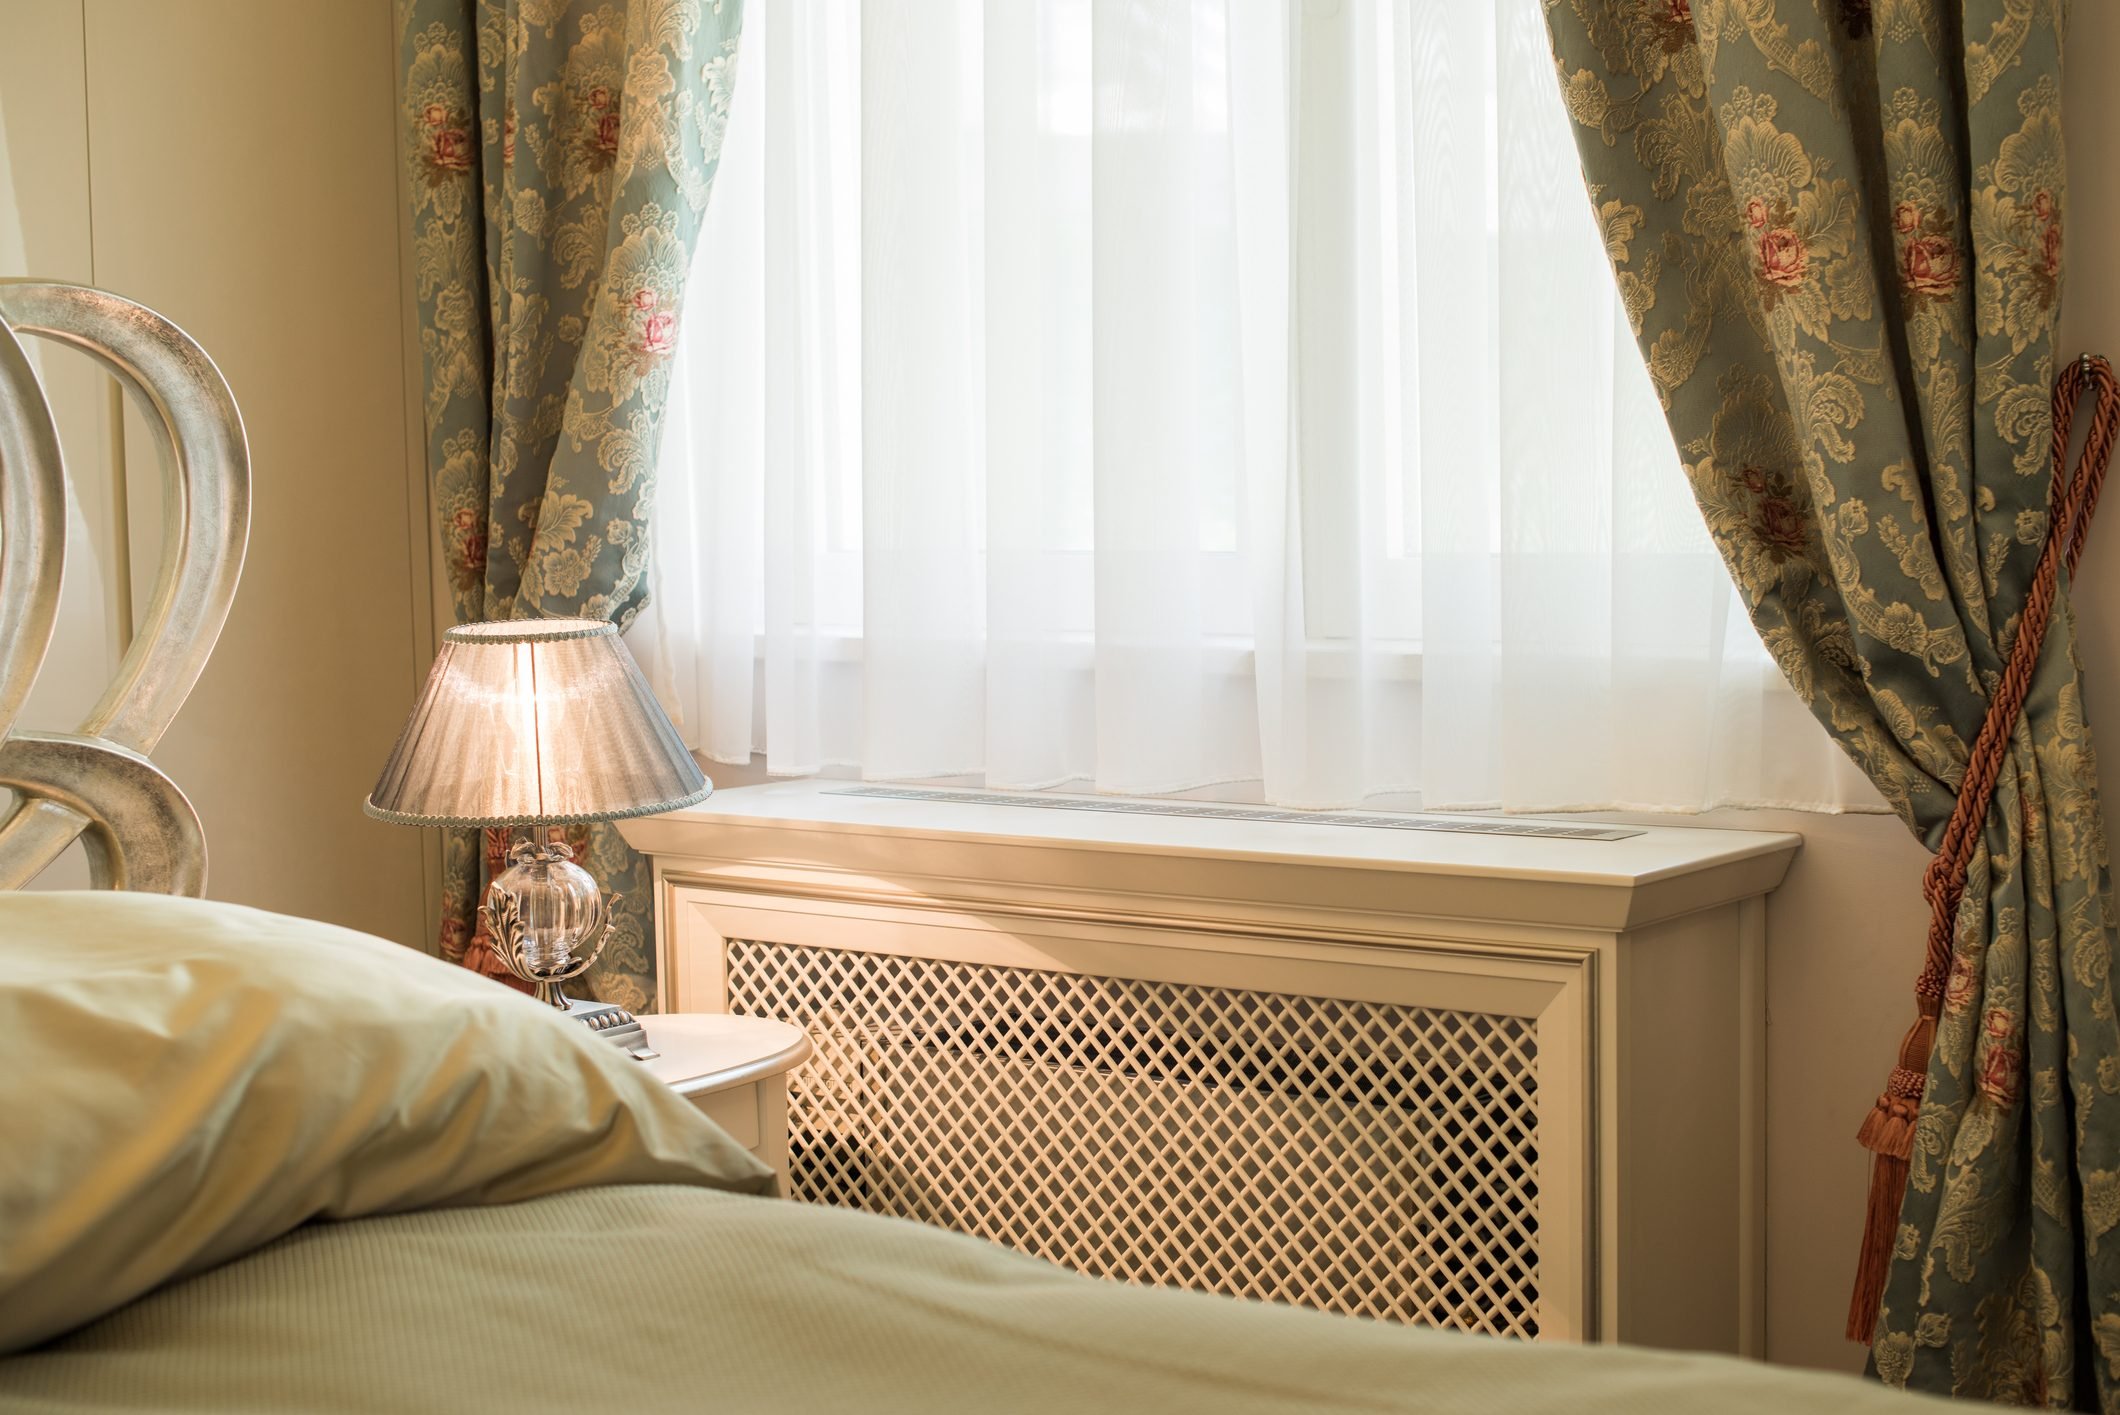 Radiator Covers Buyer's Guide: Why Use, Types (Wood, Metal & More), Costs Etc.